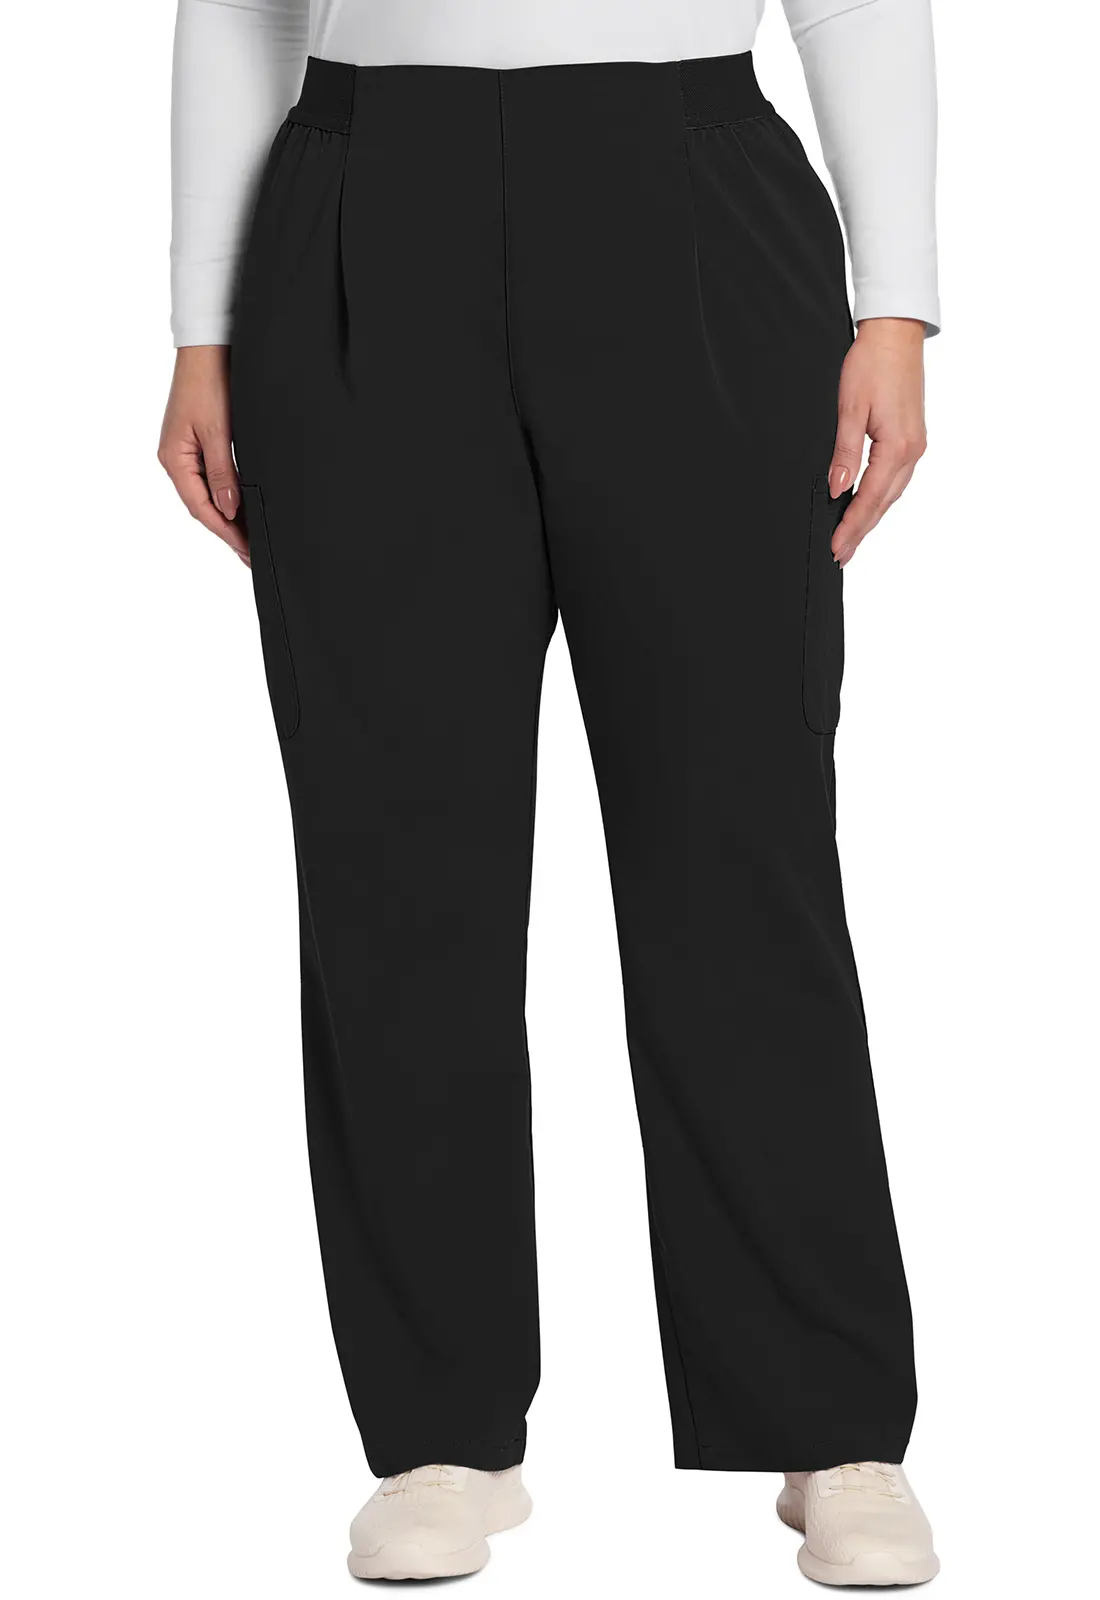 Mid Rise Pull-On Moderate Flare Leg Pant